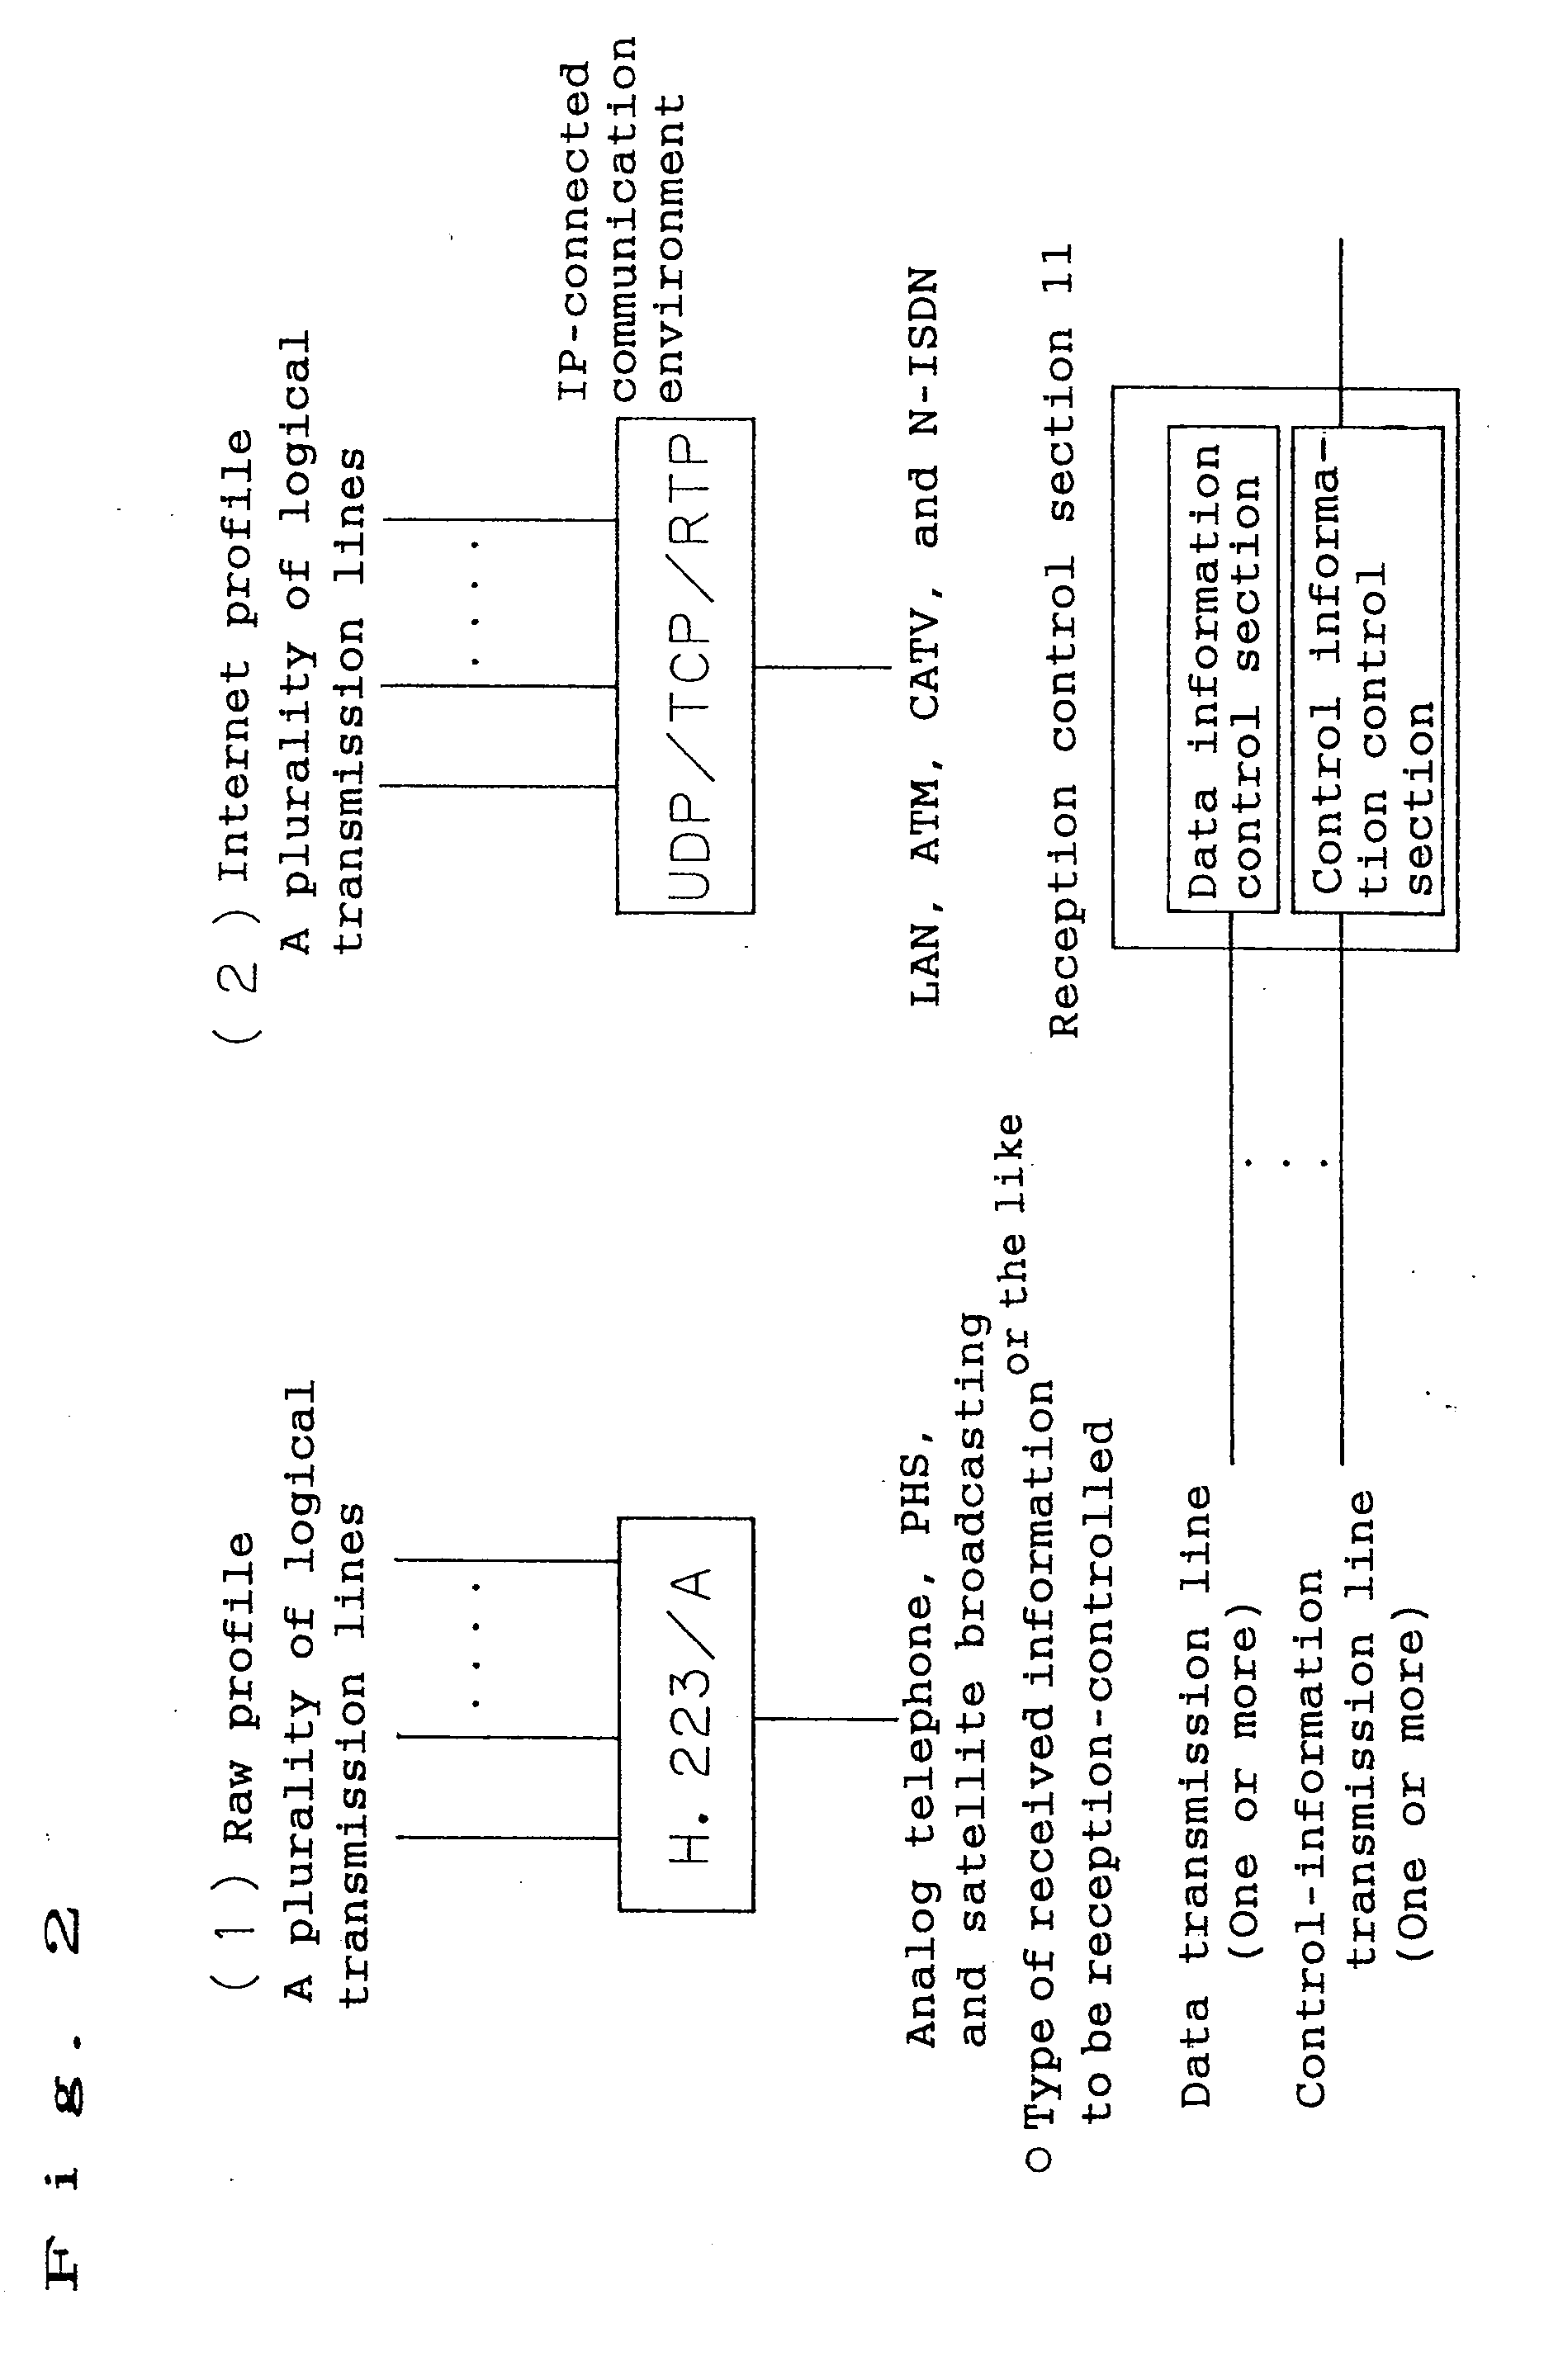 Method and apparatus for processing a data series including processing priority data